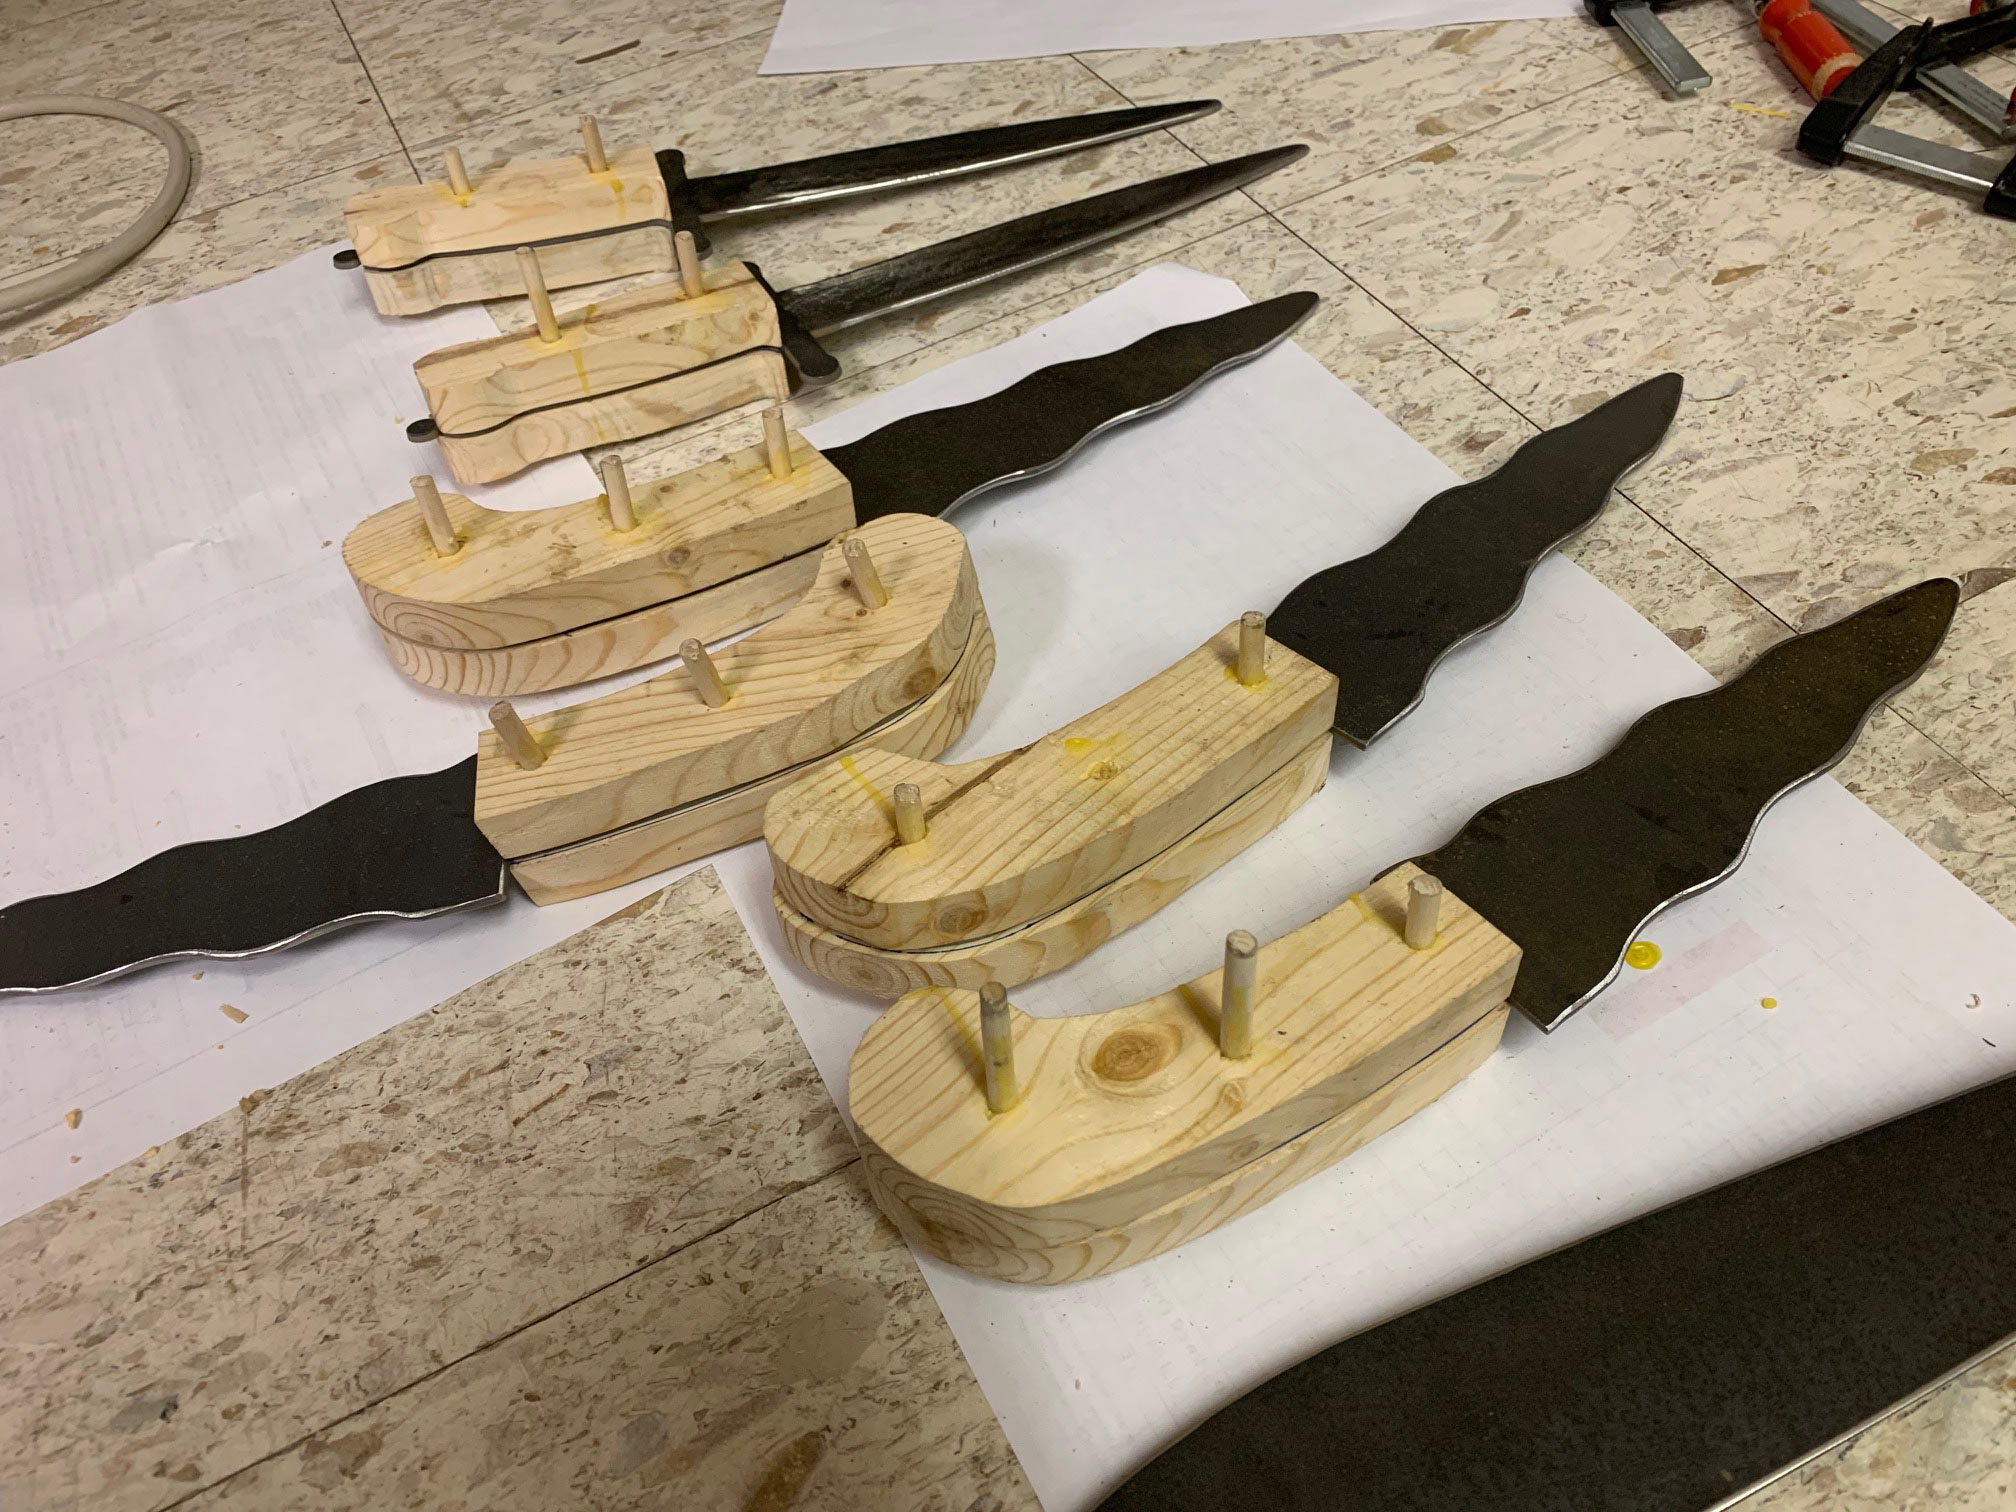 Wood handles ready for shaping and sanding